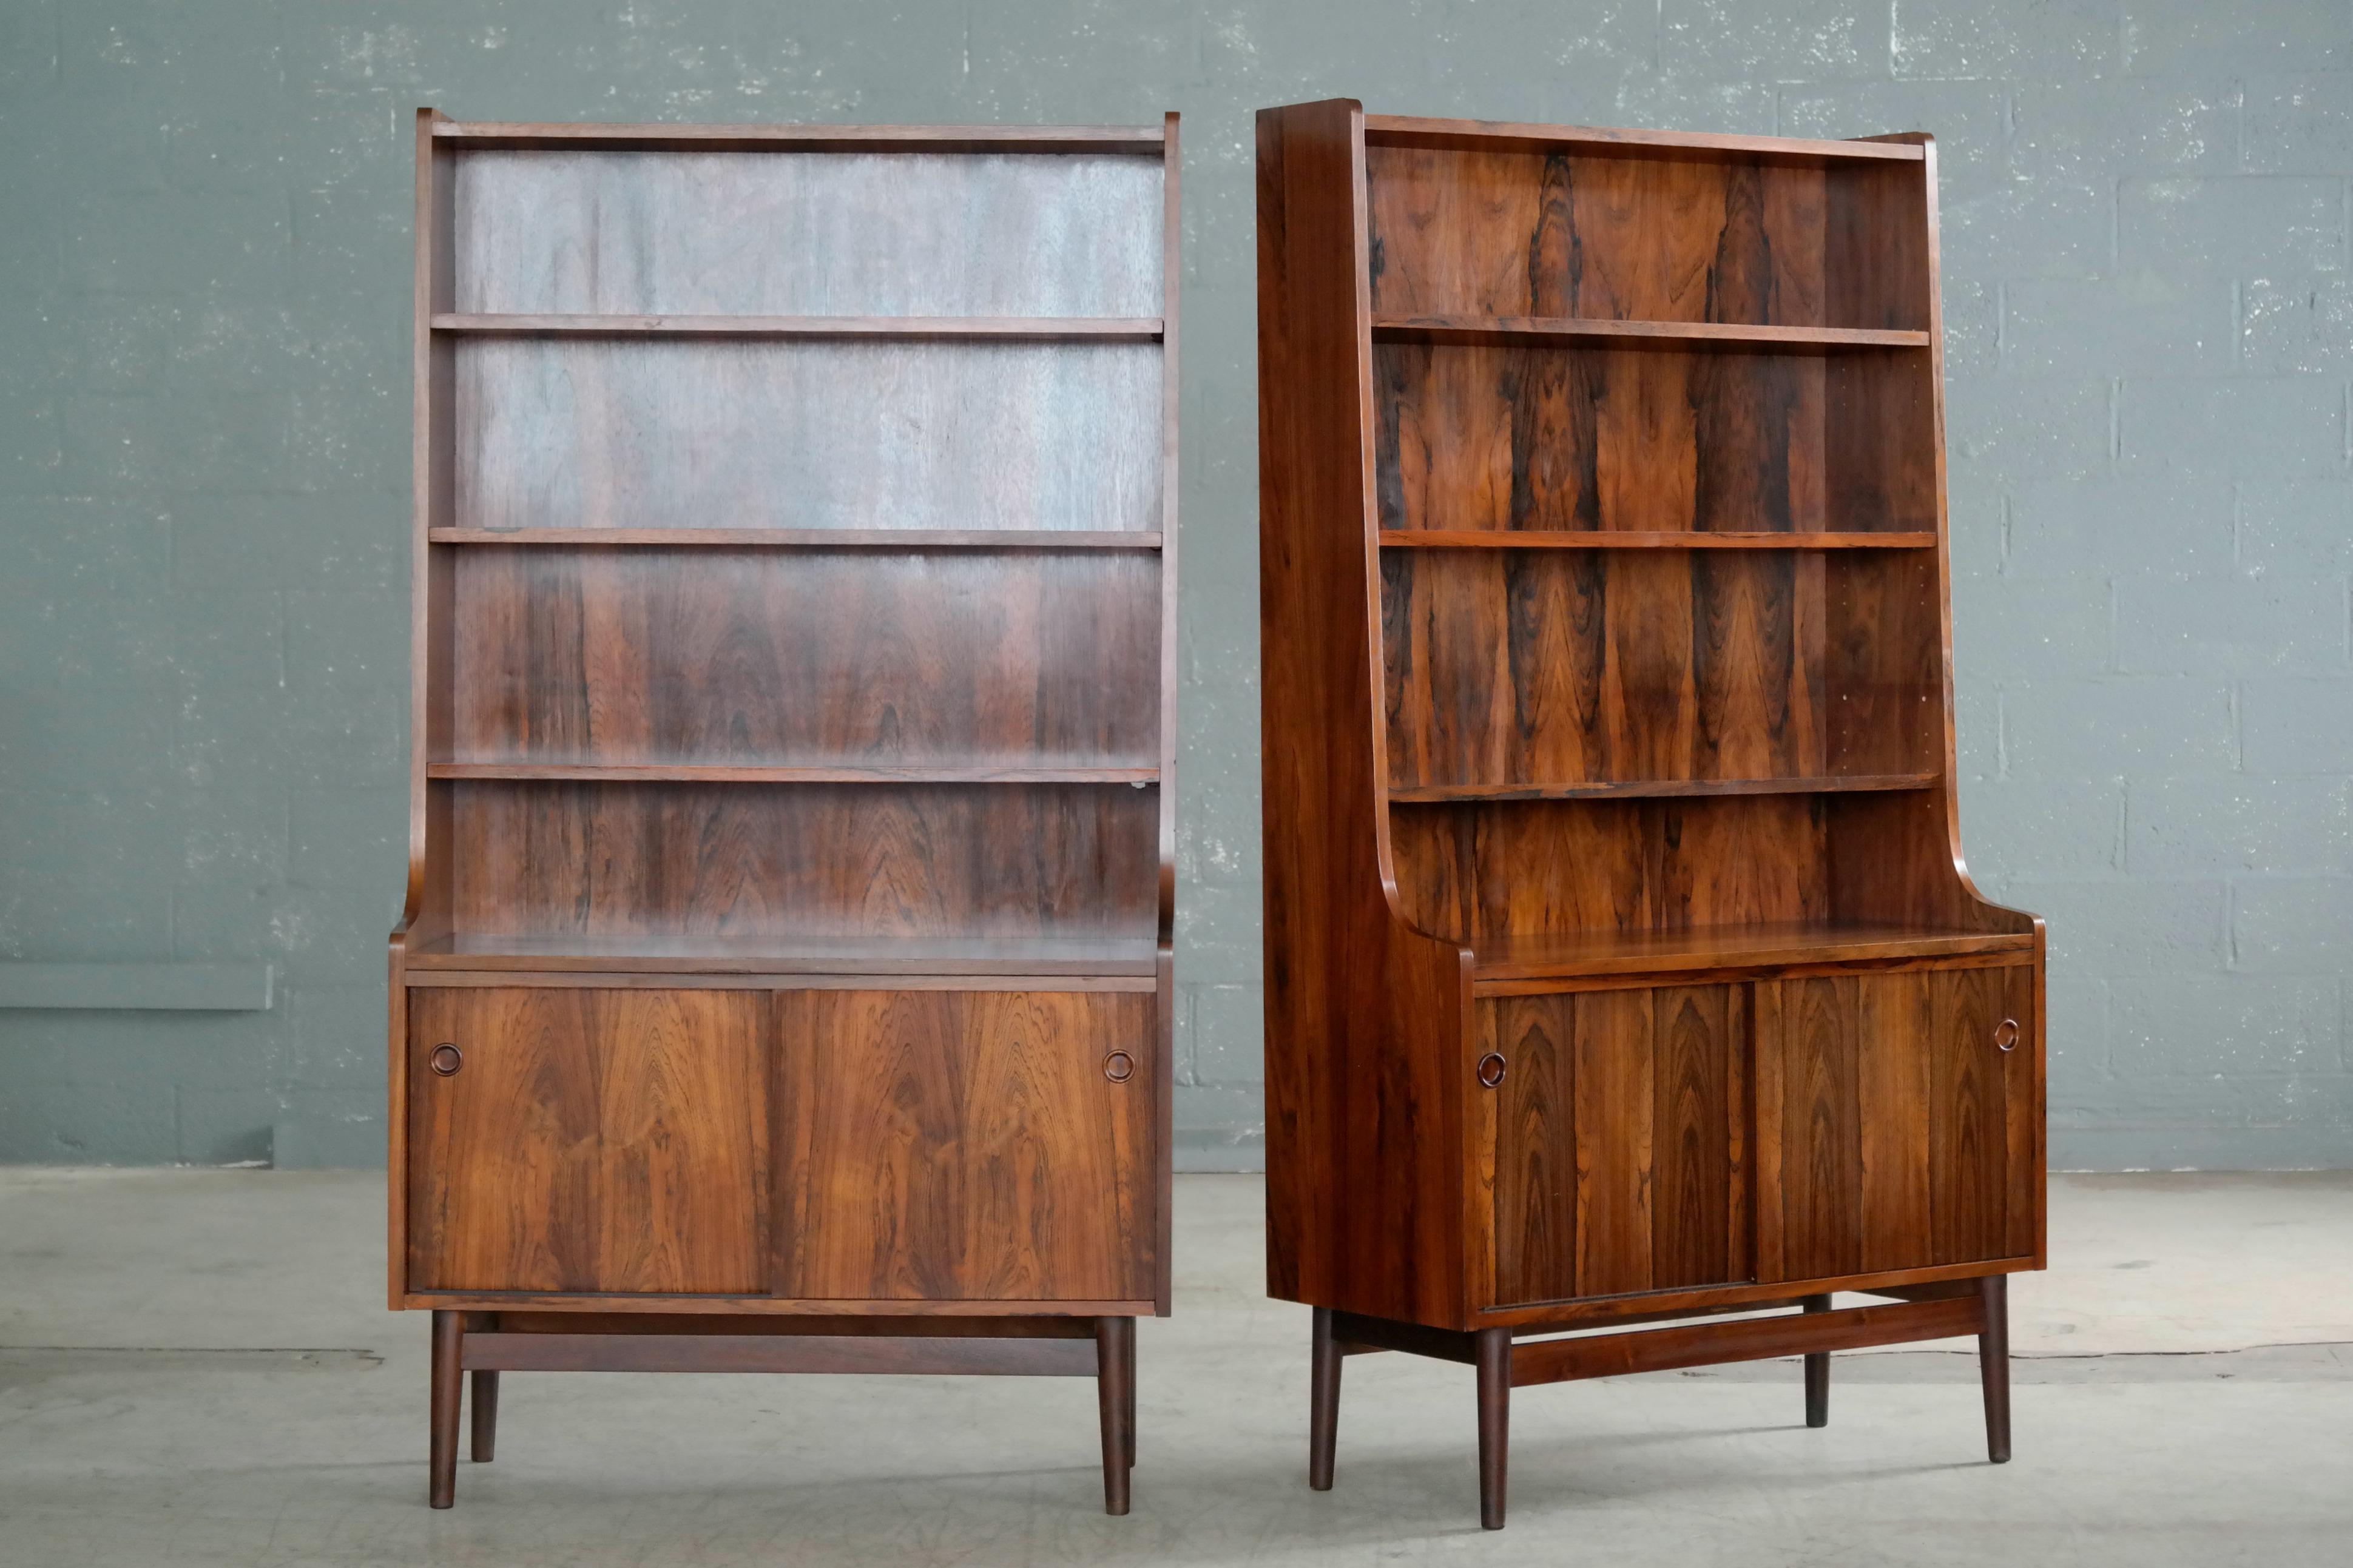 Beautiful and elegant pair of bookcases in bookmatched rosewood with beautiful deep and dark rosewood color and rich grain. Designed by Johannes Sorth for Bornholm's Mobler also known as Nexoe Teak. Very versatile with adjustable shelves and two